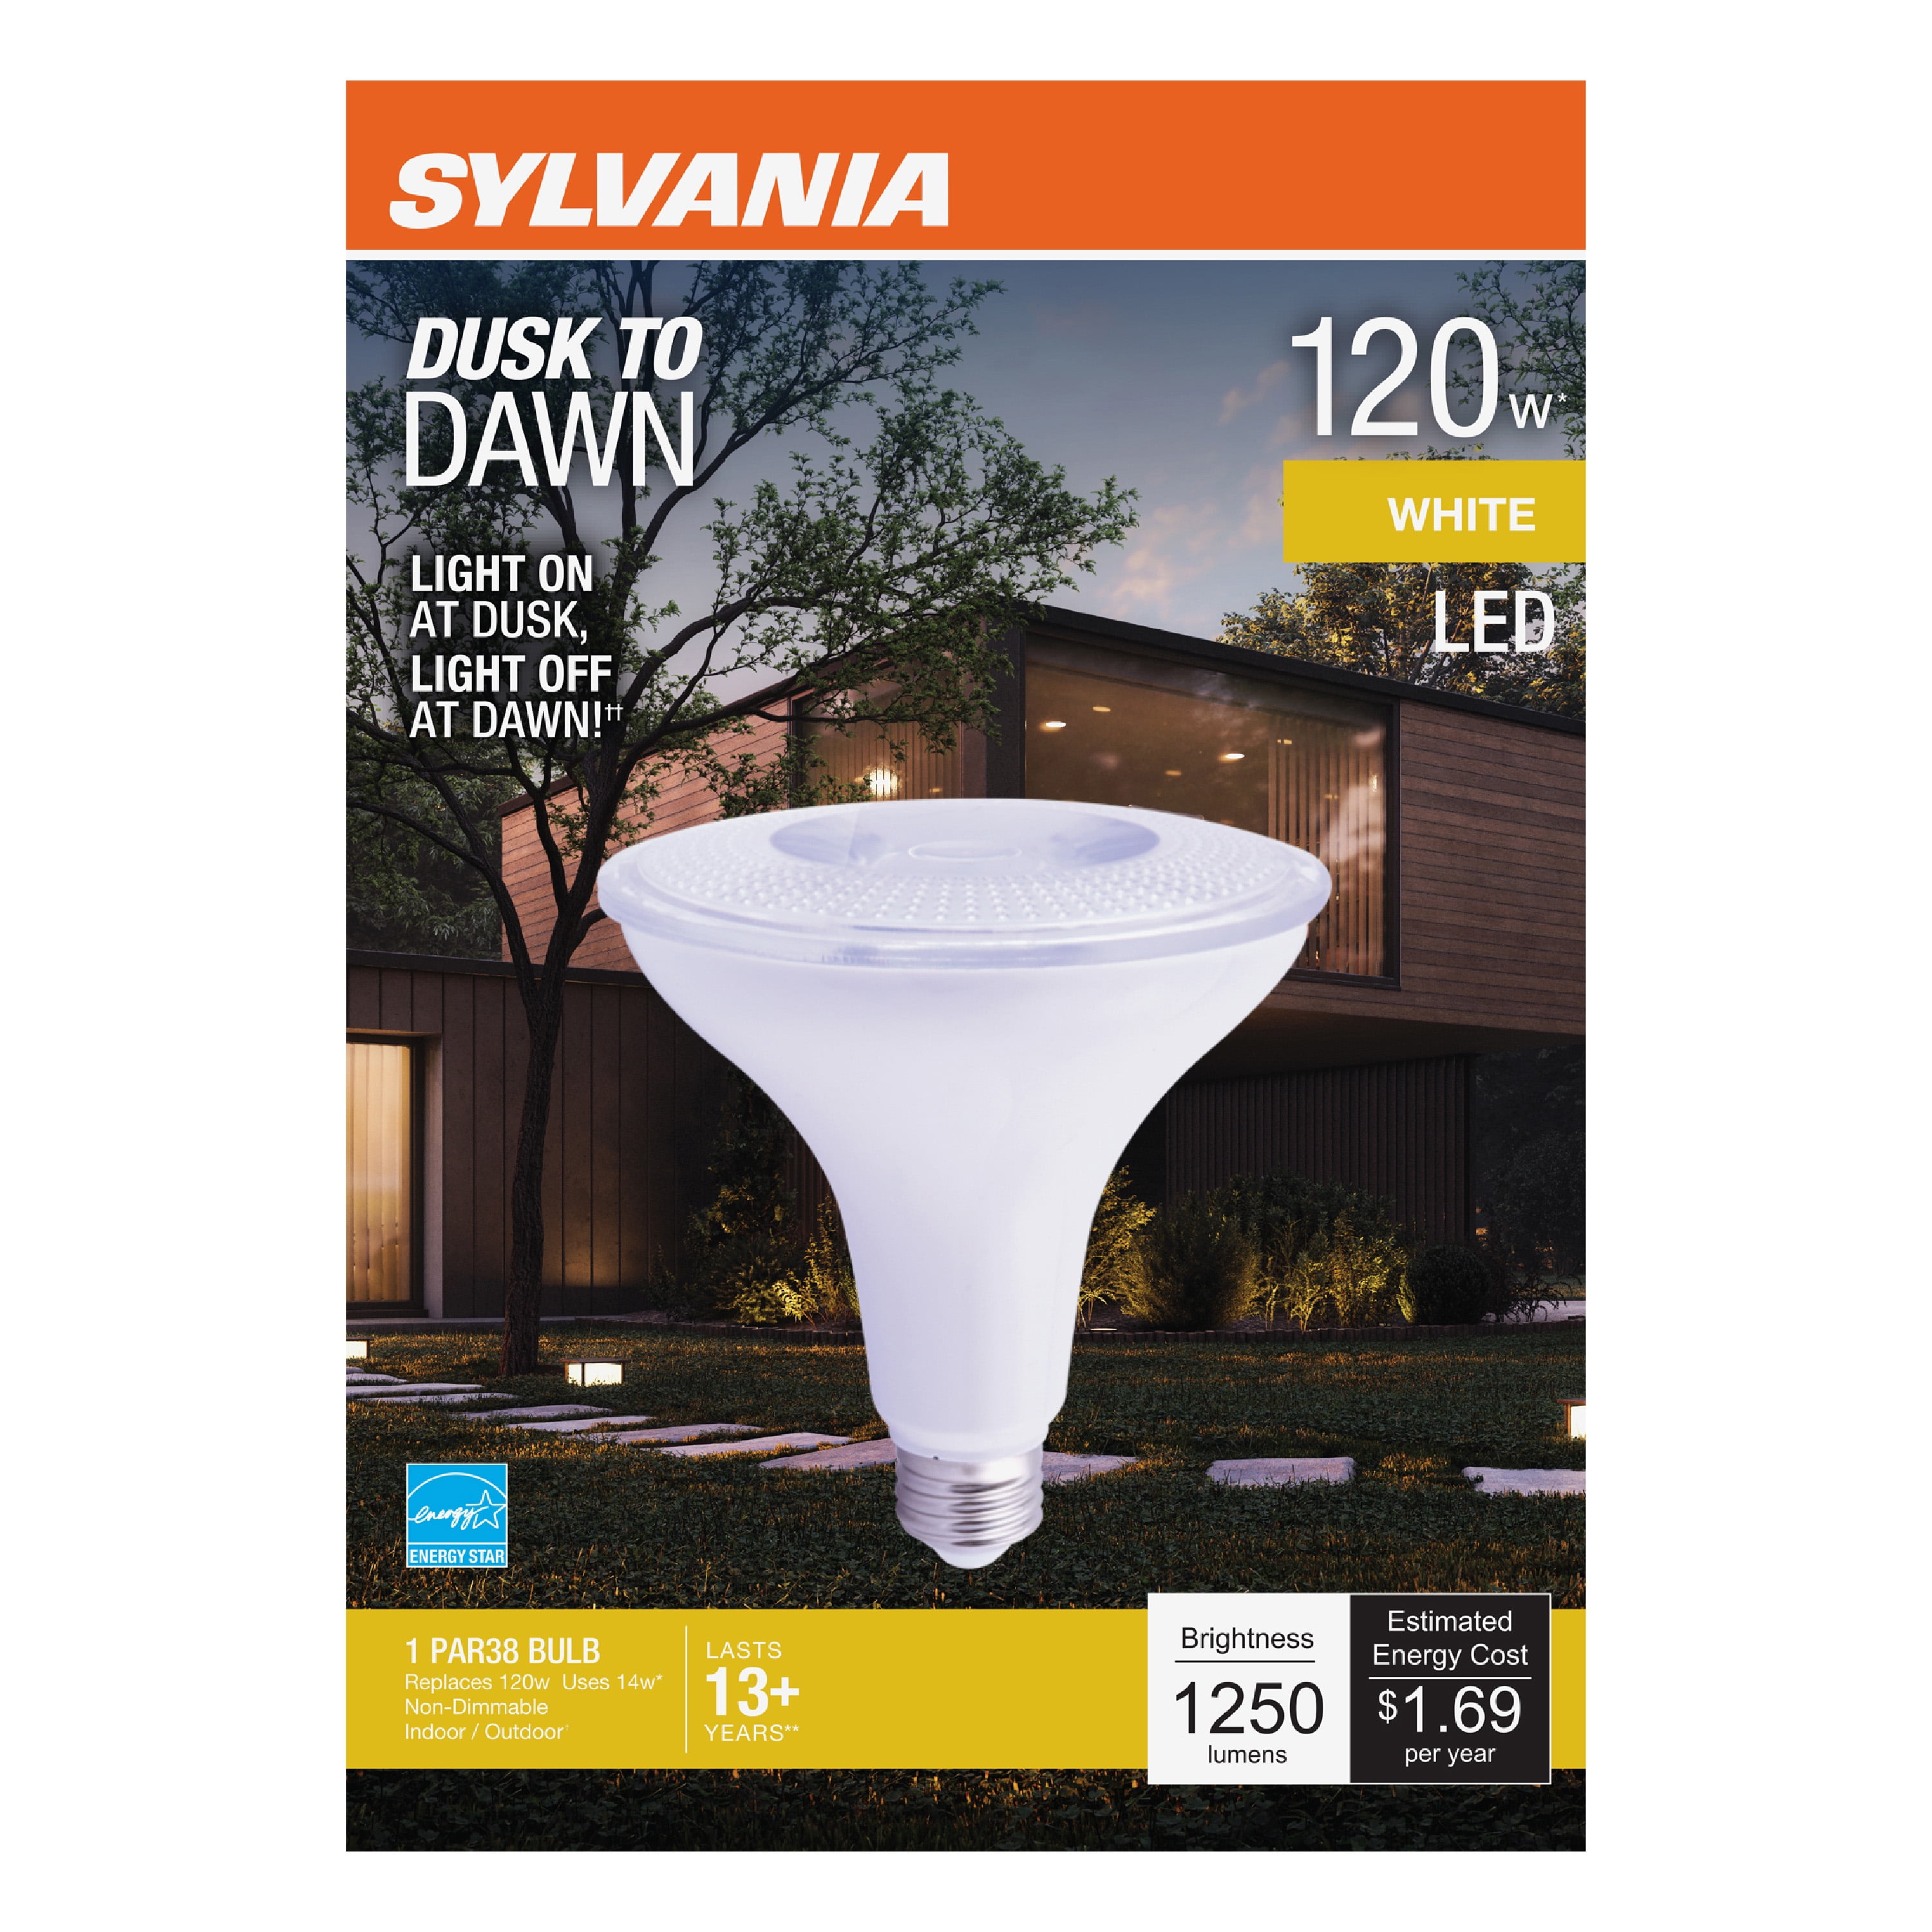 SYLVANIA Dusk to Dawn PAR38 LED Light Bulb with Auto on/off Light Sensor, 120 Watts Equivalent, Indoor and Outdoor, 1250 Lumens, 3000K